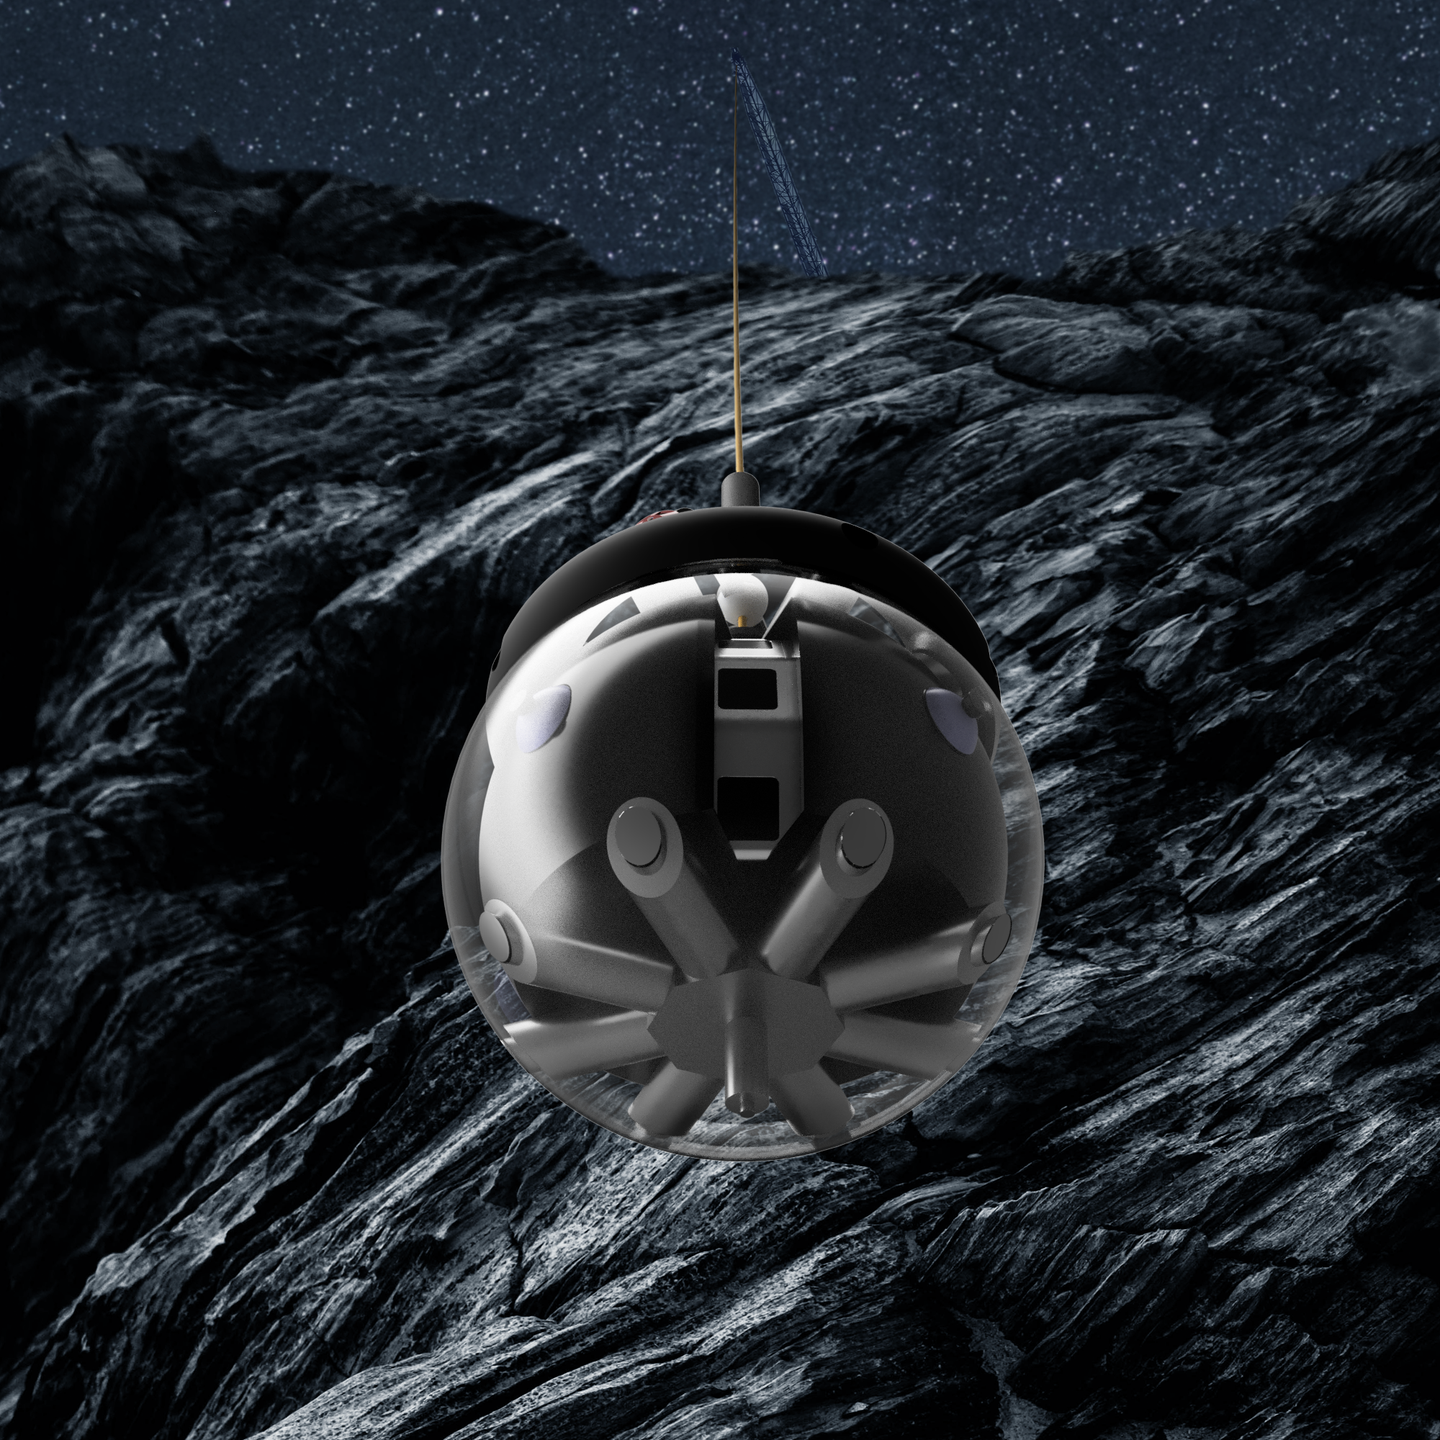 Artist's impression of the DAEDALUS robot on the moon